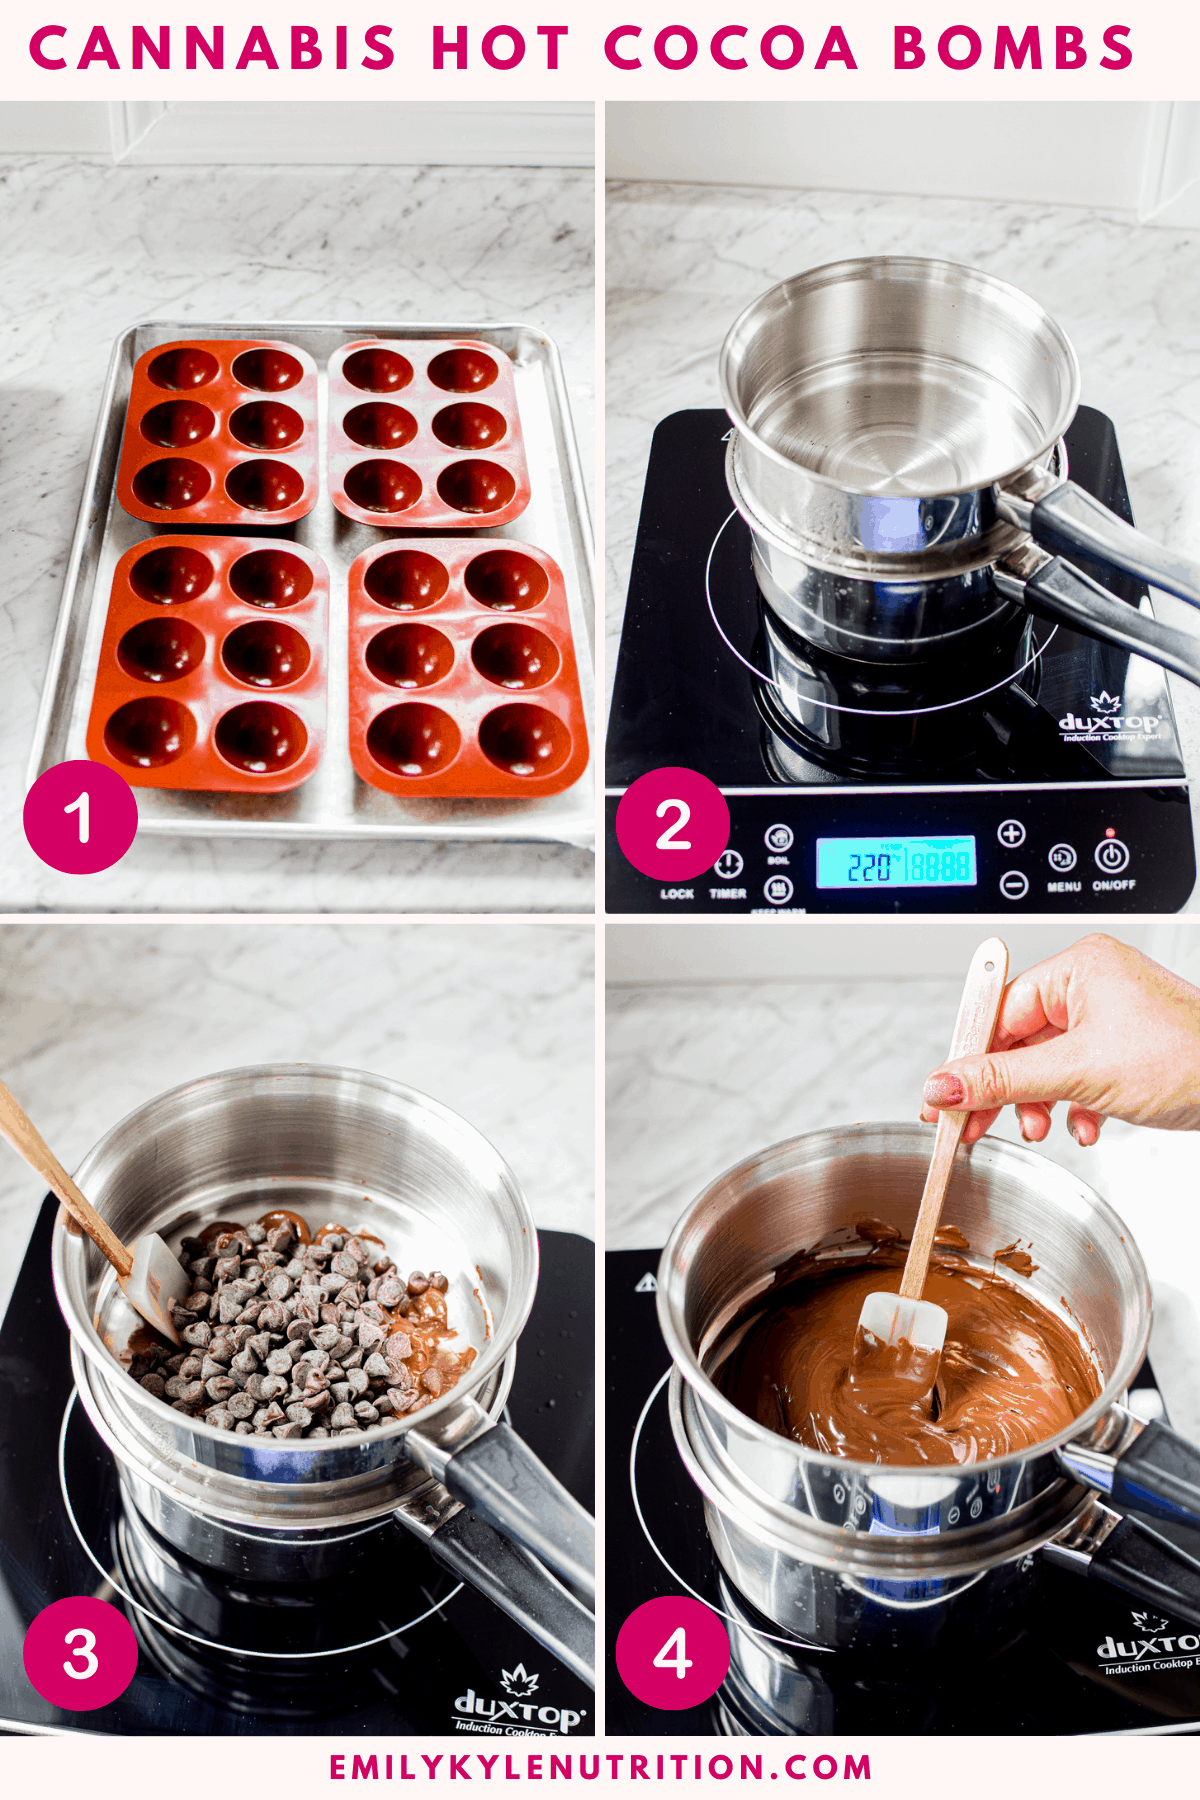 A 4-step image collage showing how to make cannabis hot cocoa bombs inlcuding prepping the molds, putting together the double boiler, adding chocolate chips to the double boiler and melting the chocolate.